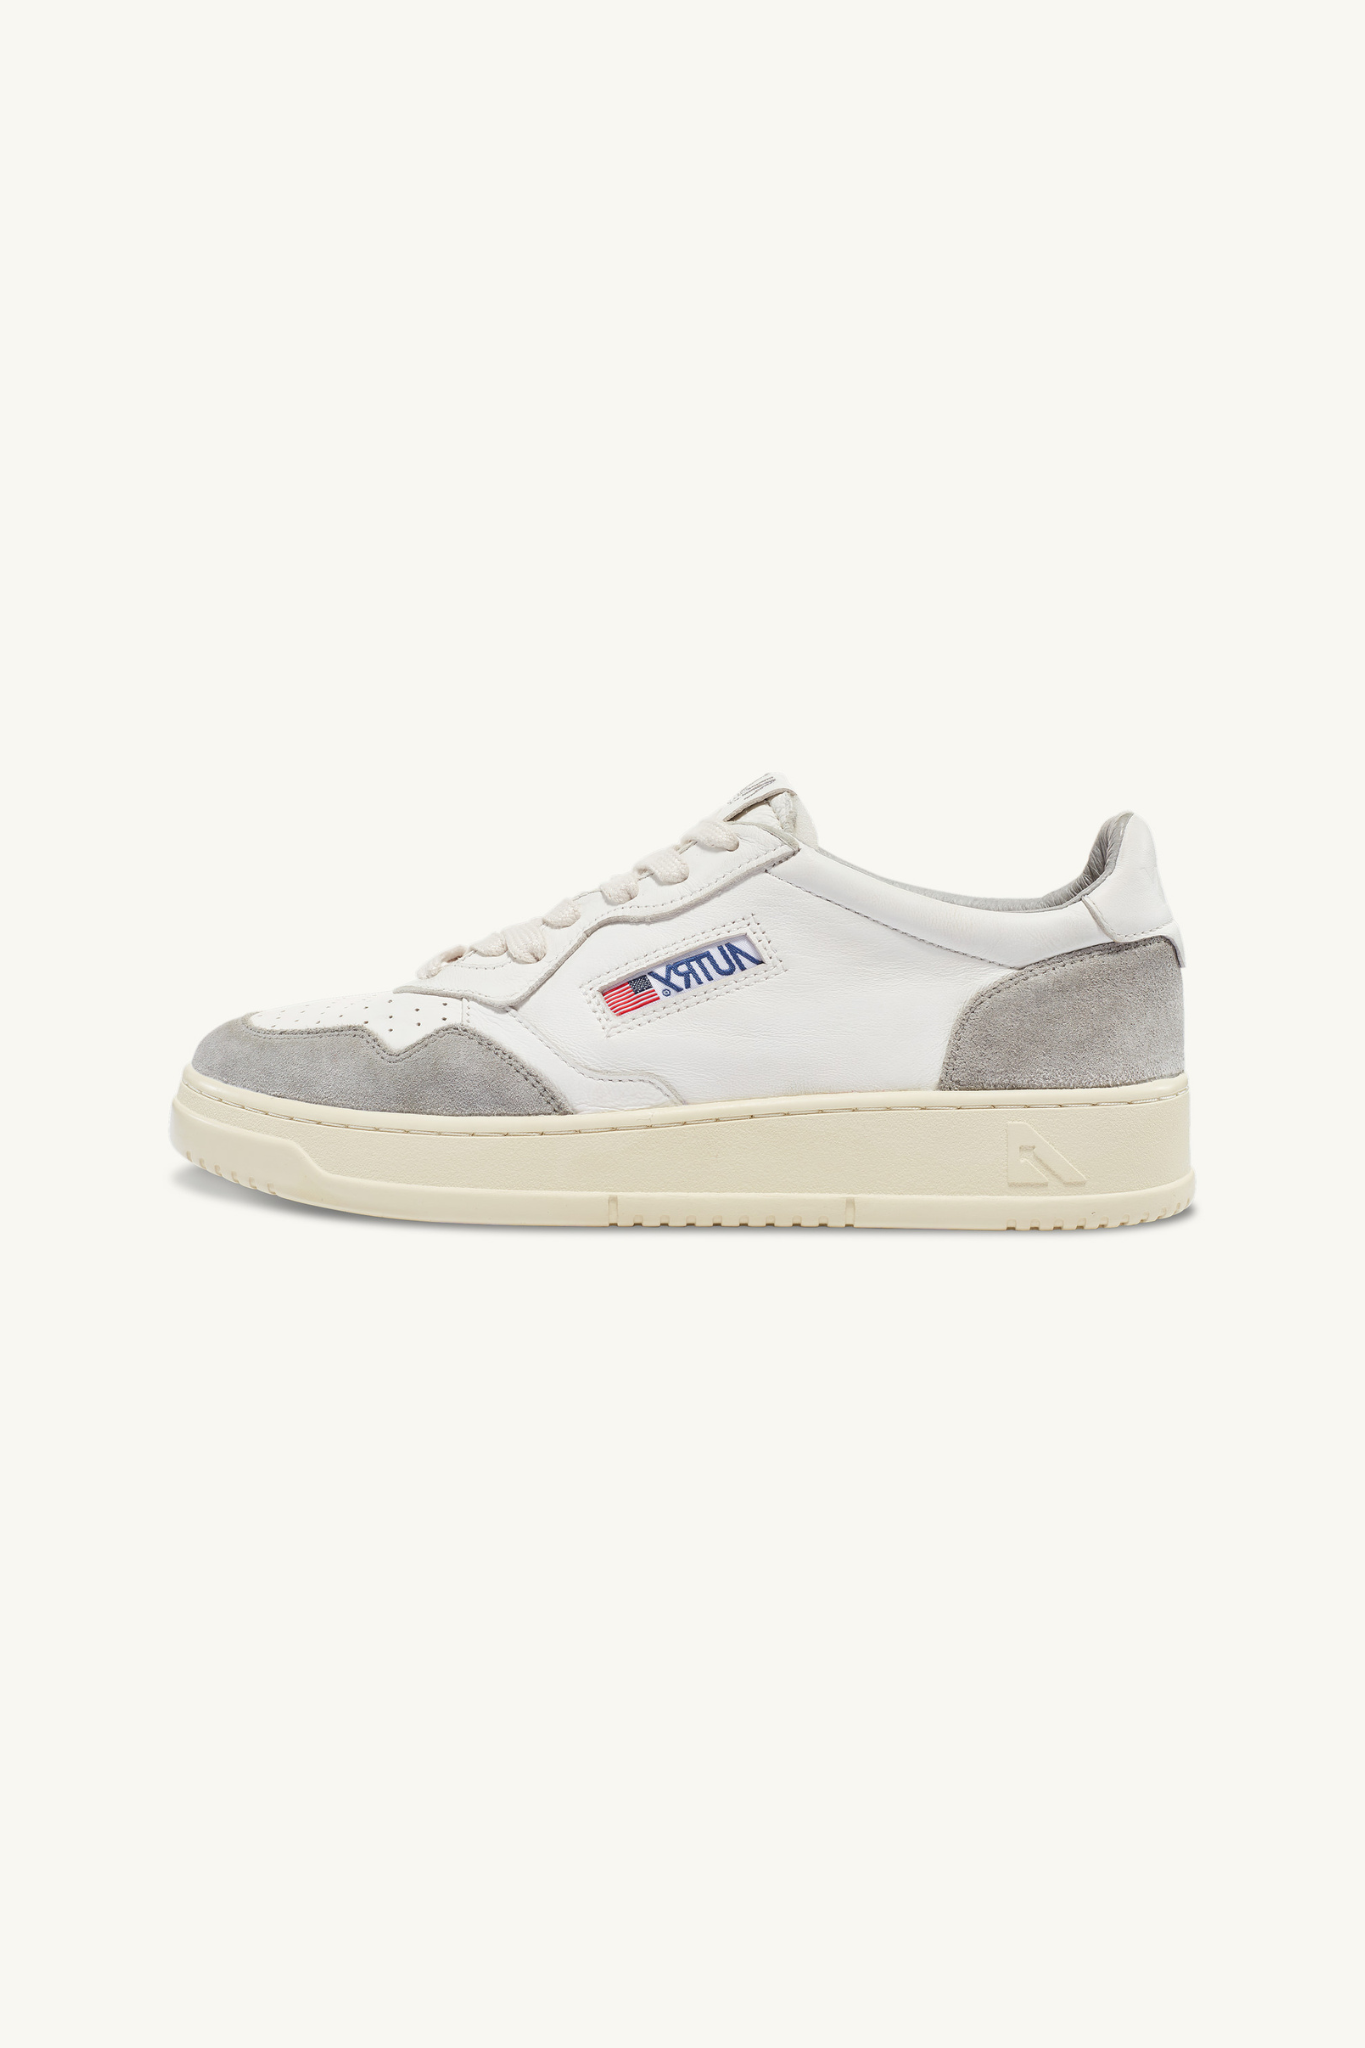 AULM-GS25 - MEDALIST LOW SNEAKERS IN WHITE GOATSKIN AND GRAY SUEDE